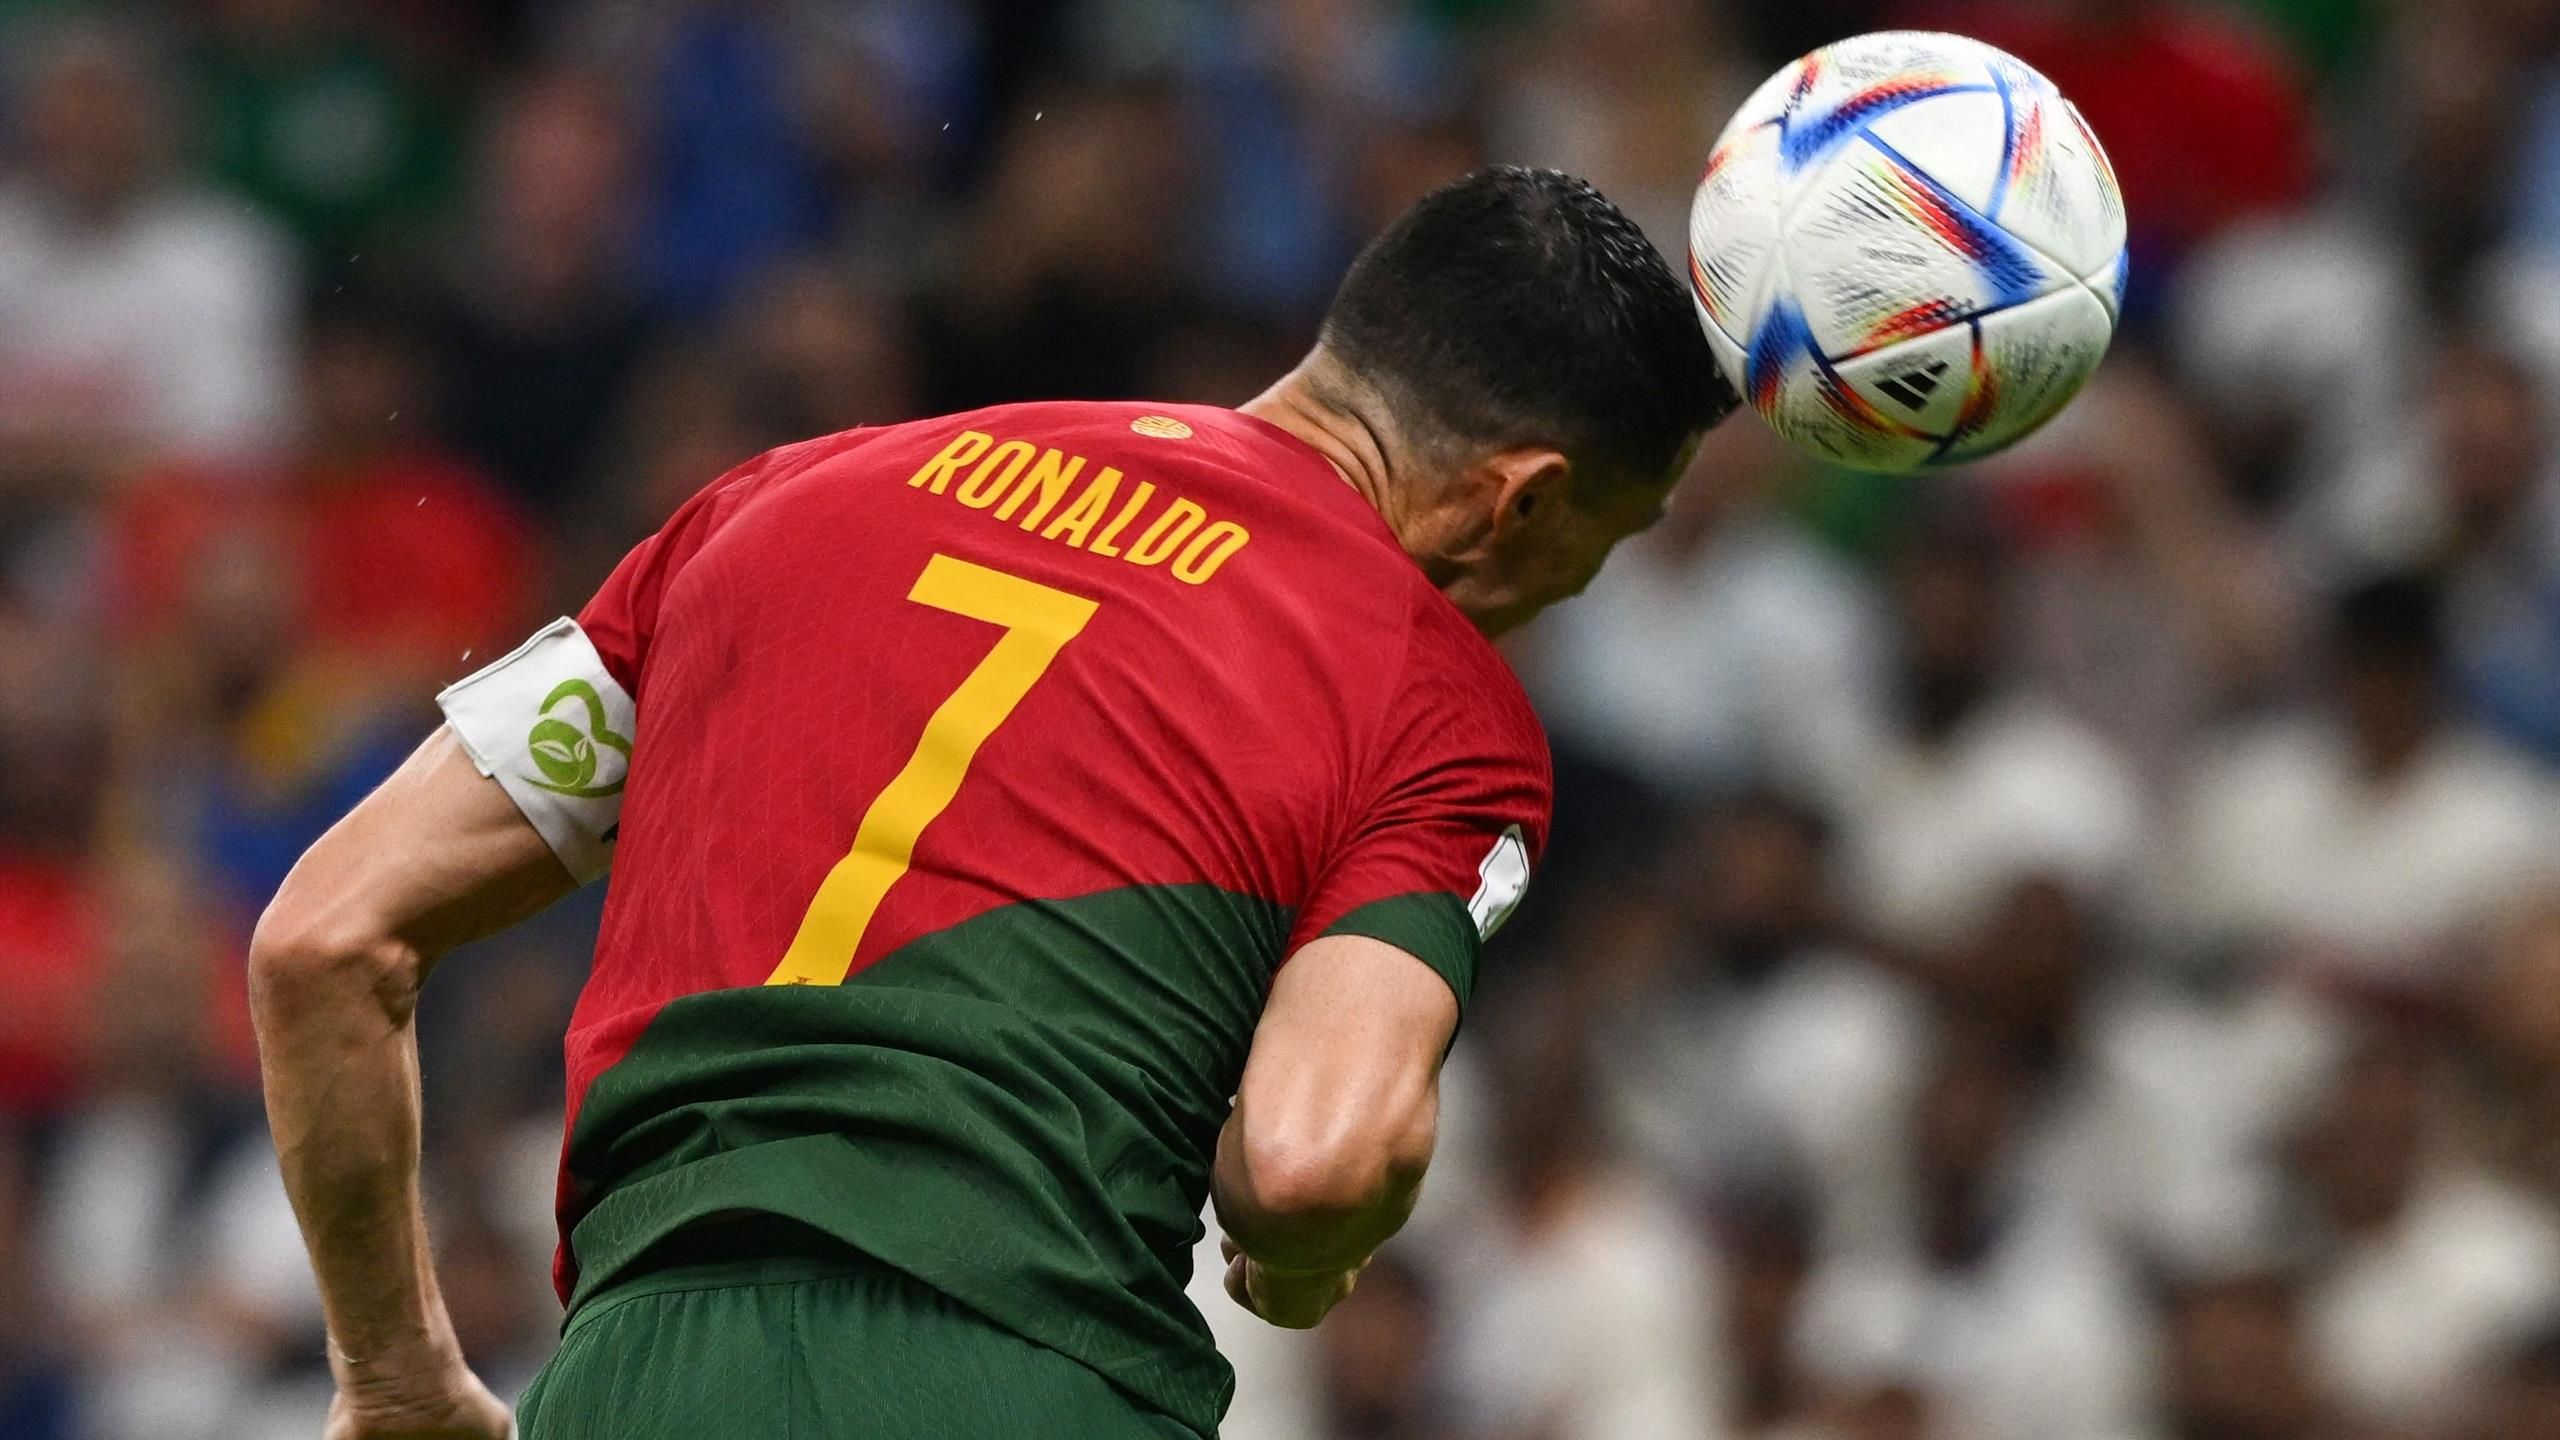 Cristiano Ronaldo did not get touch on Portugal World Cup 2022 goal against Uruguay, says adidas, FIFA